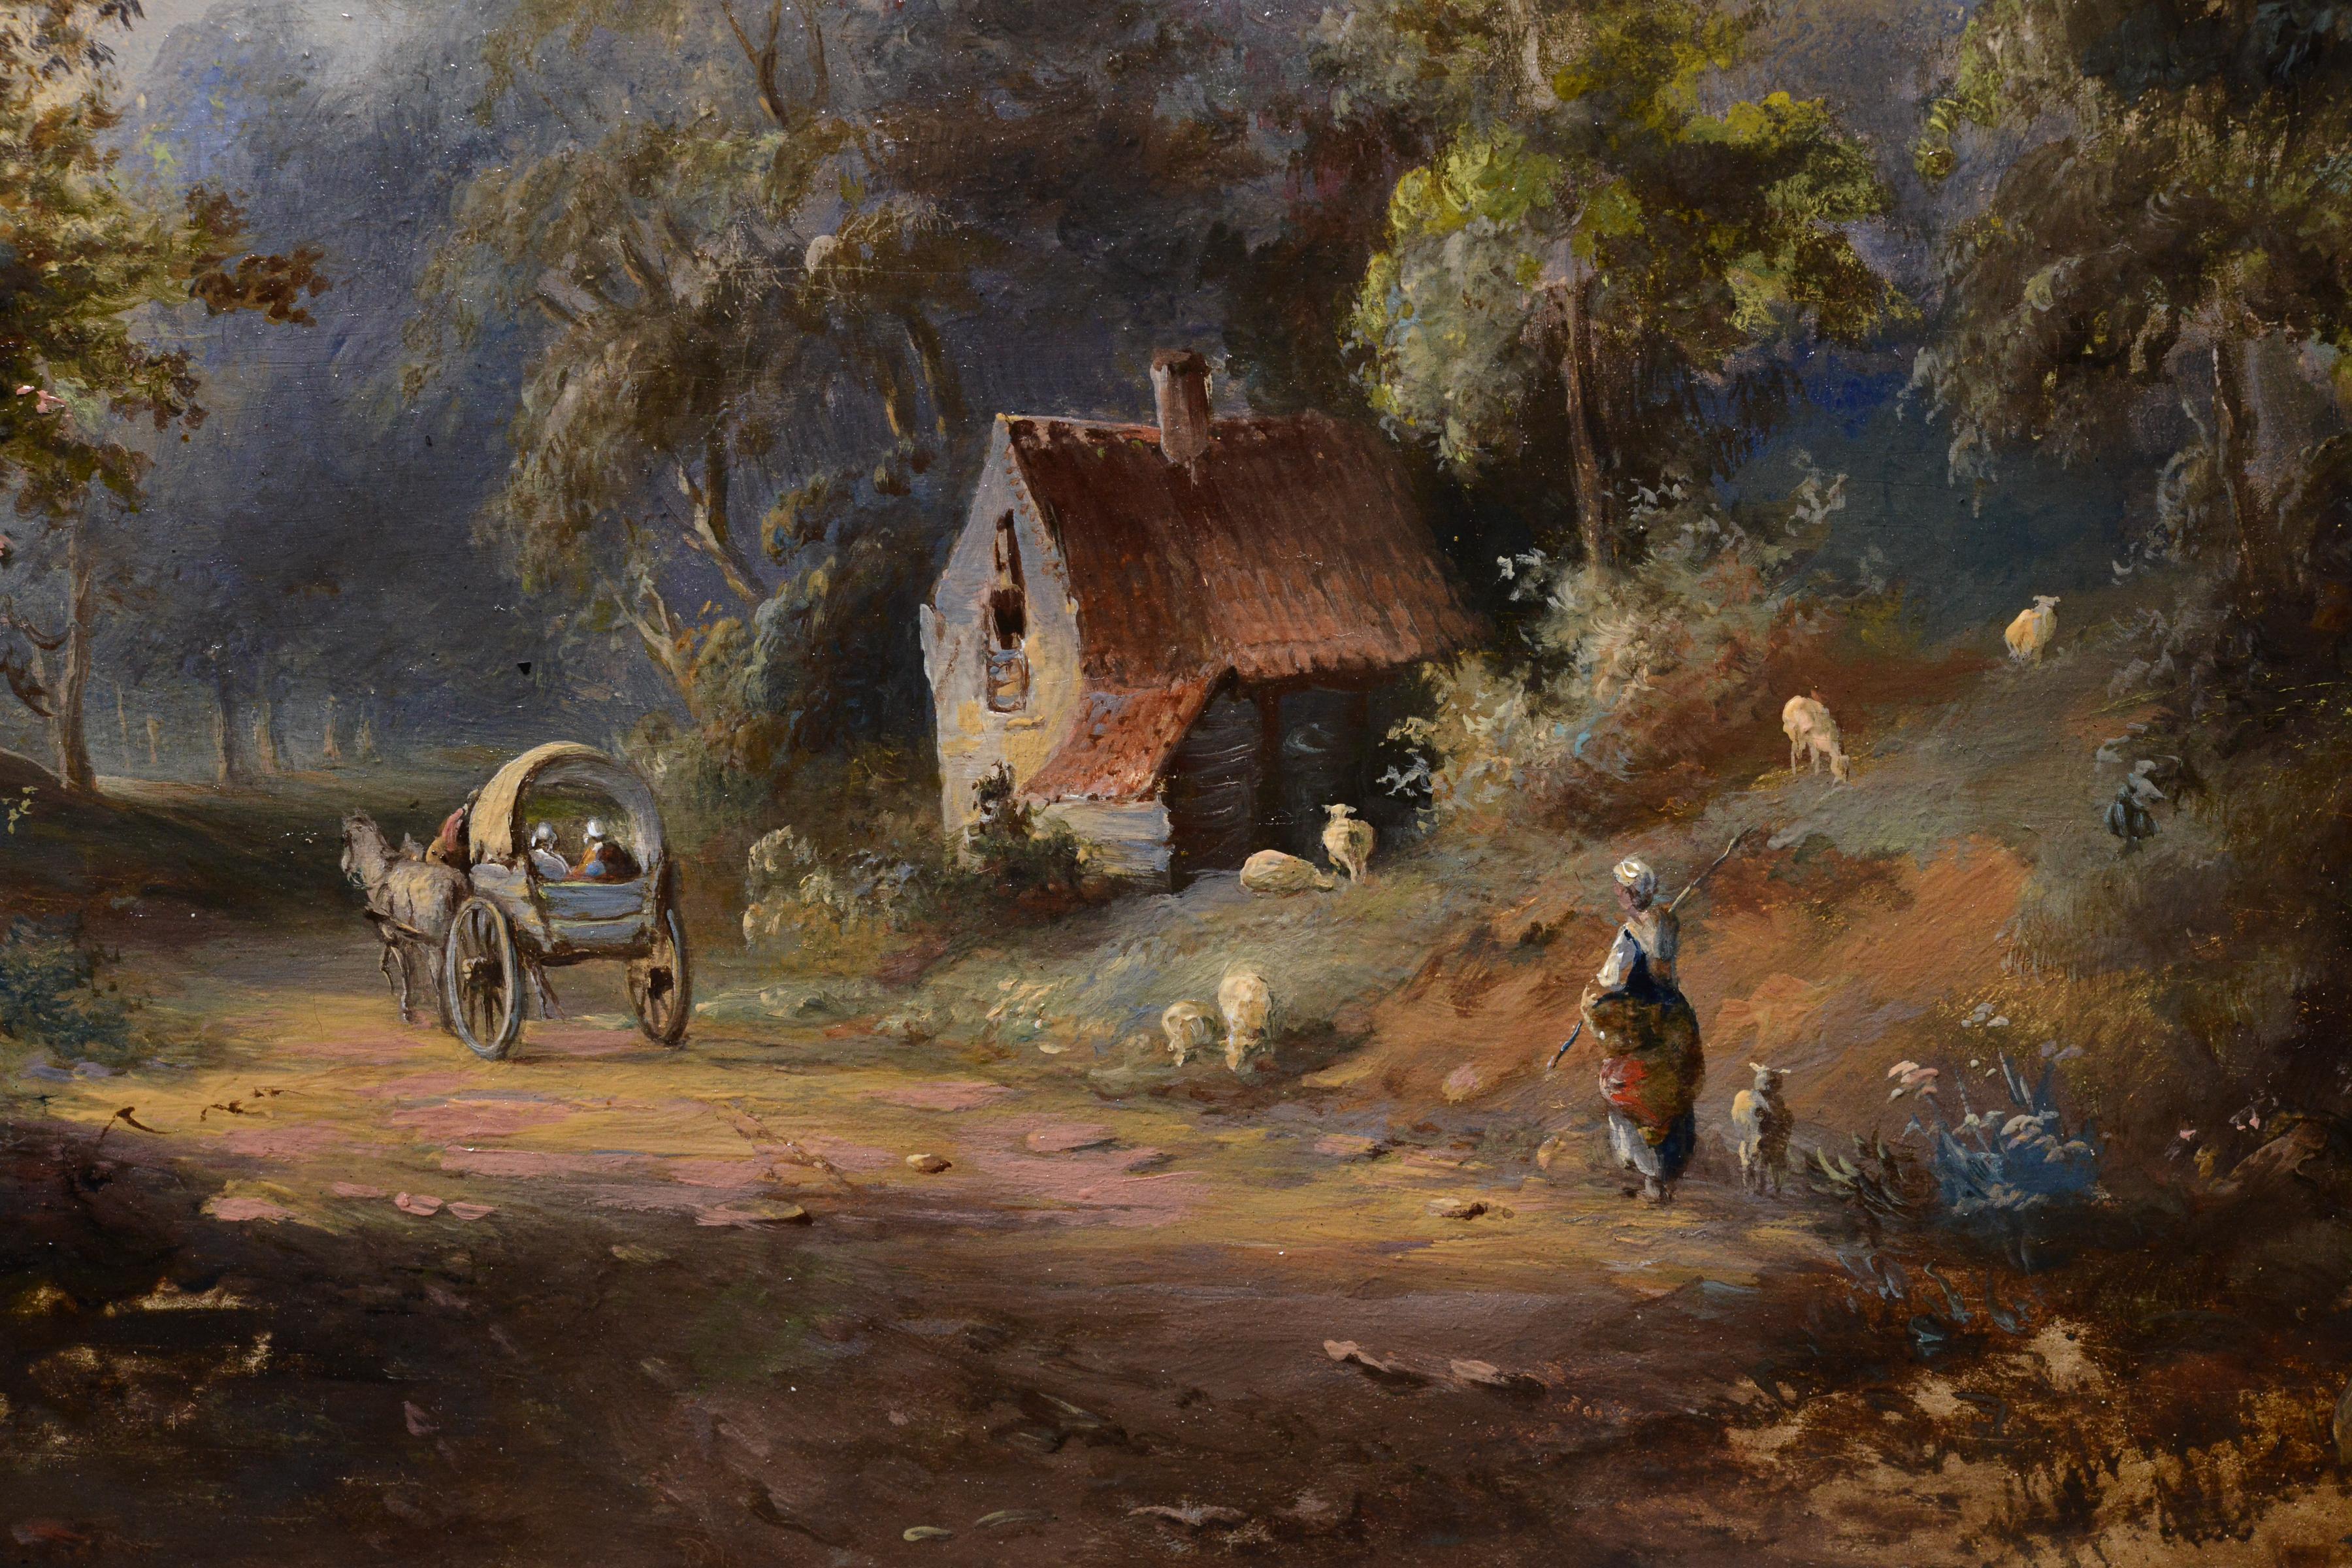 Brass plate leads to Russian artist Pavel Pavlovich Dzhogin (1834 - 1885). This 19th century oil painting beautifully captures a serene rural scene with travelers on a cart traveling along a forest road surrounded by beautiful and picturesque